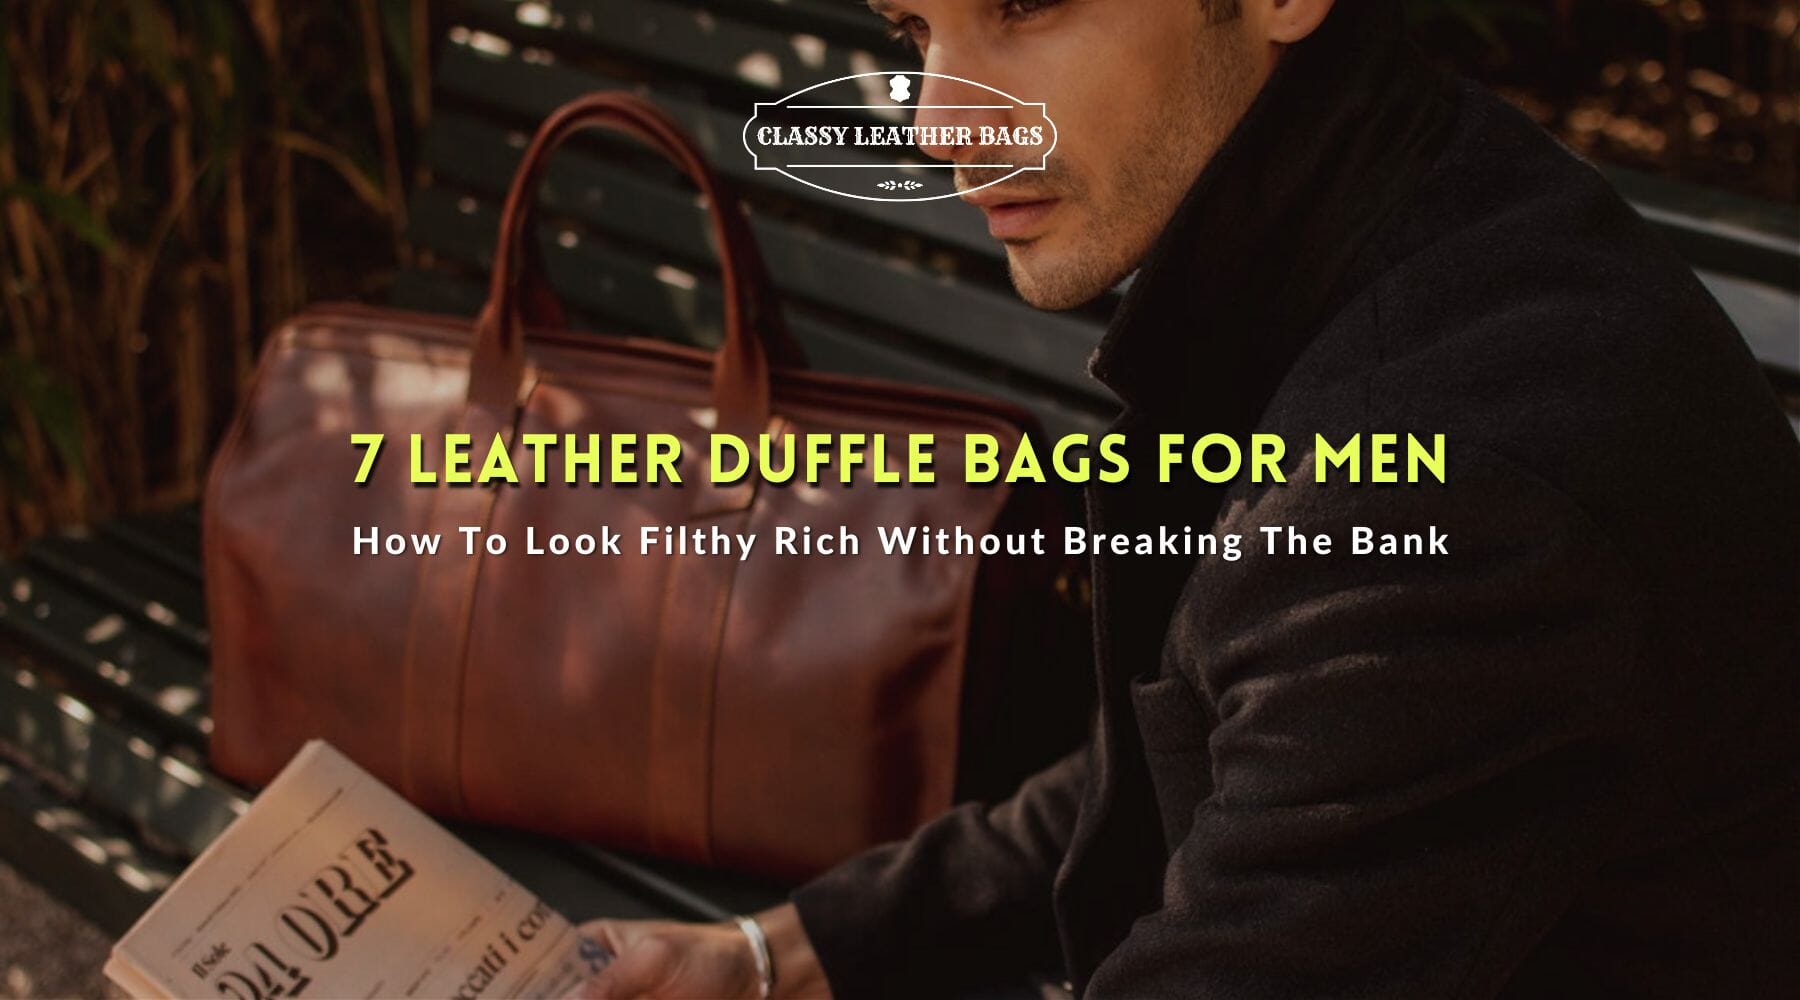 7 Leather Duffle Bags for Men